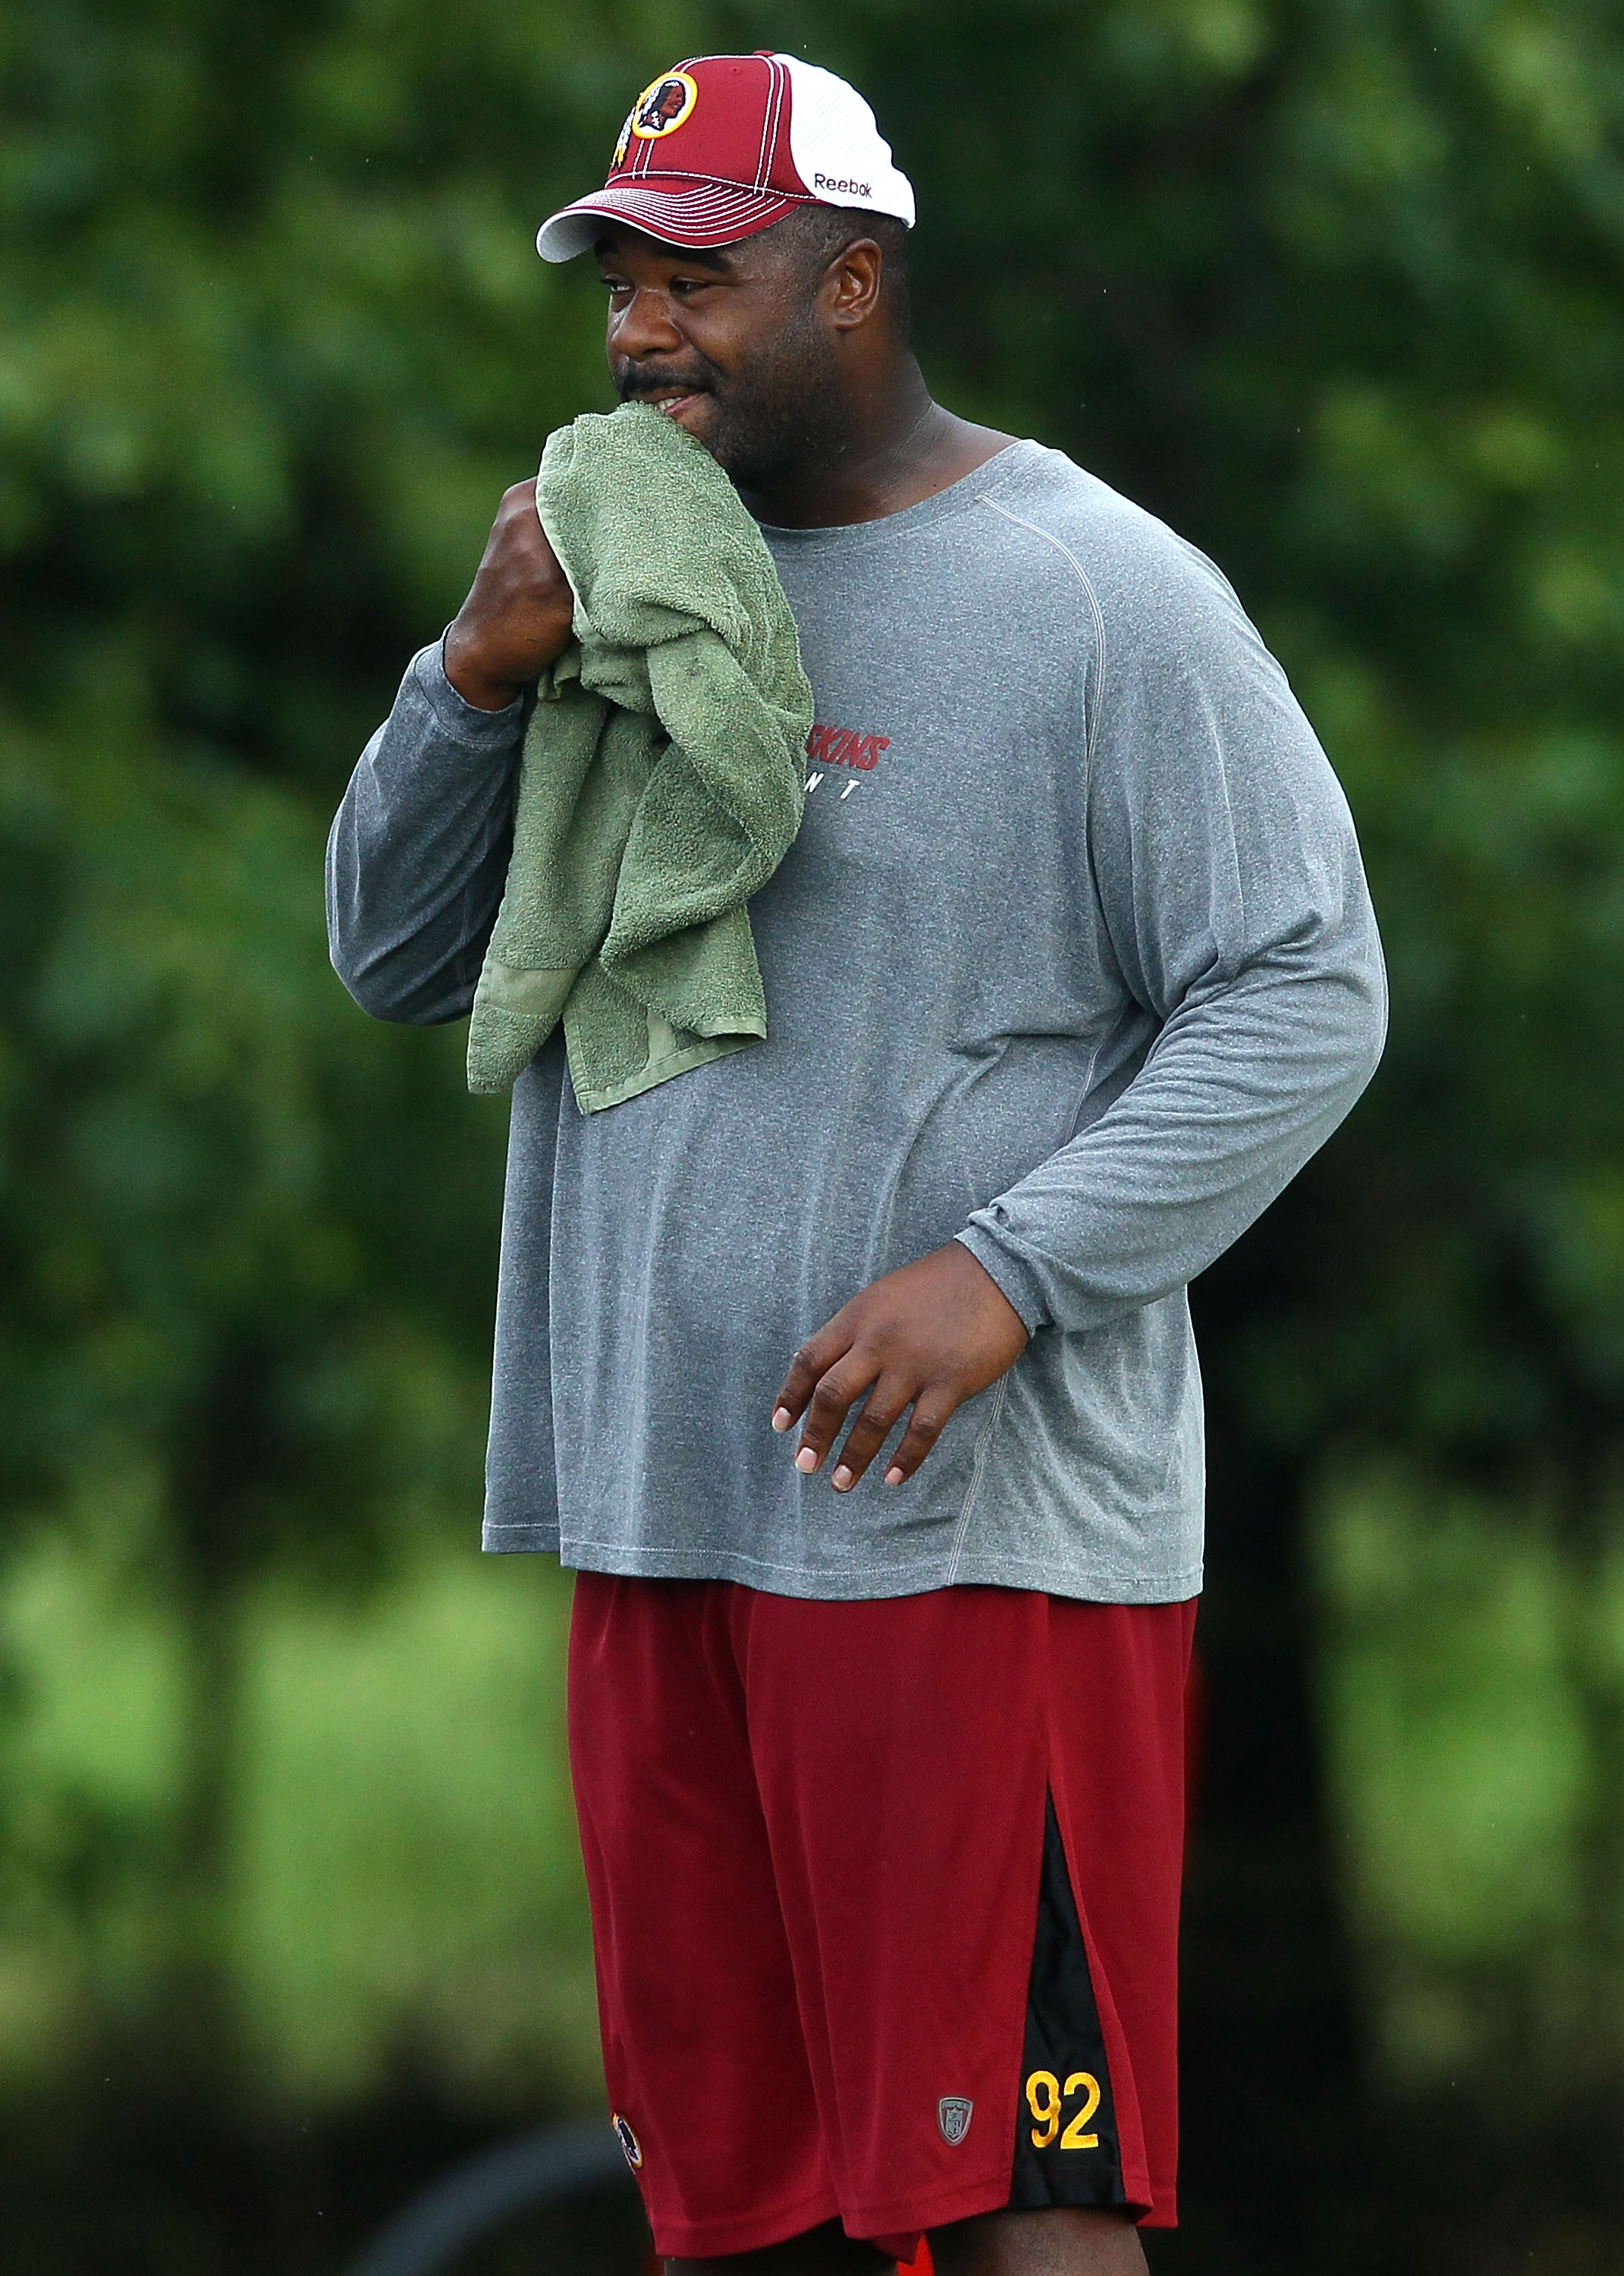 ASHBURN, VA - JULY 29:  Defensive lineman Albert Haynesworth #92 works out after practice during the Redskins first day of training camp on July 29, 2010 in Ashburn, Virginia.  (Photo by Win McNamee/Getty Images)